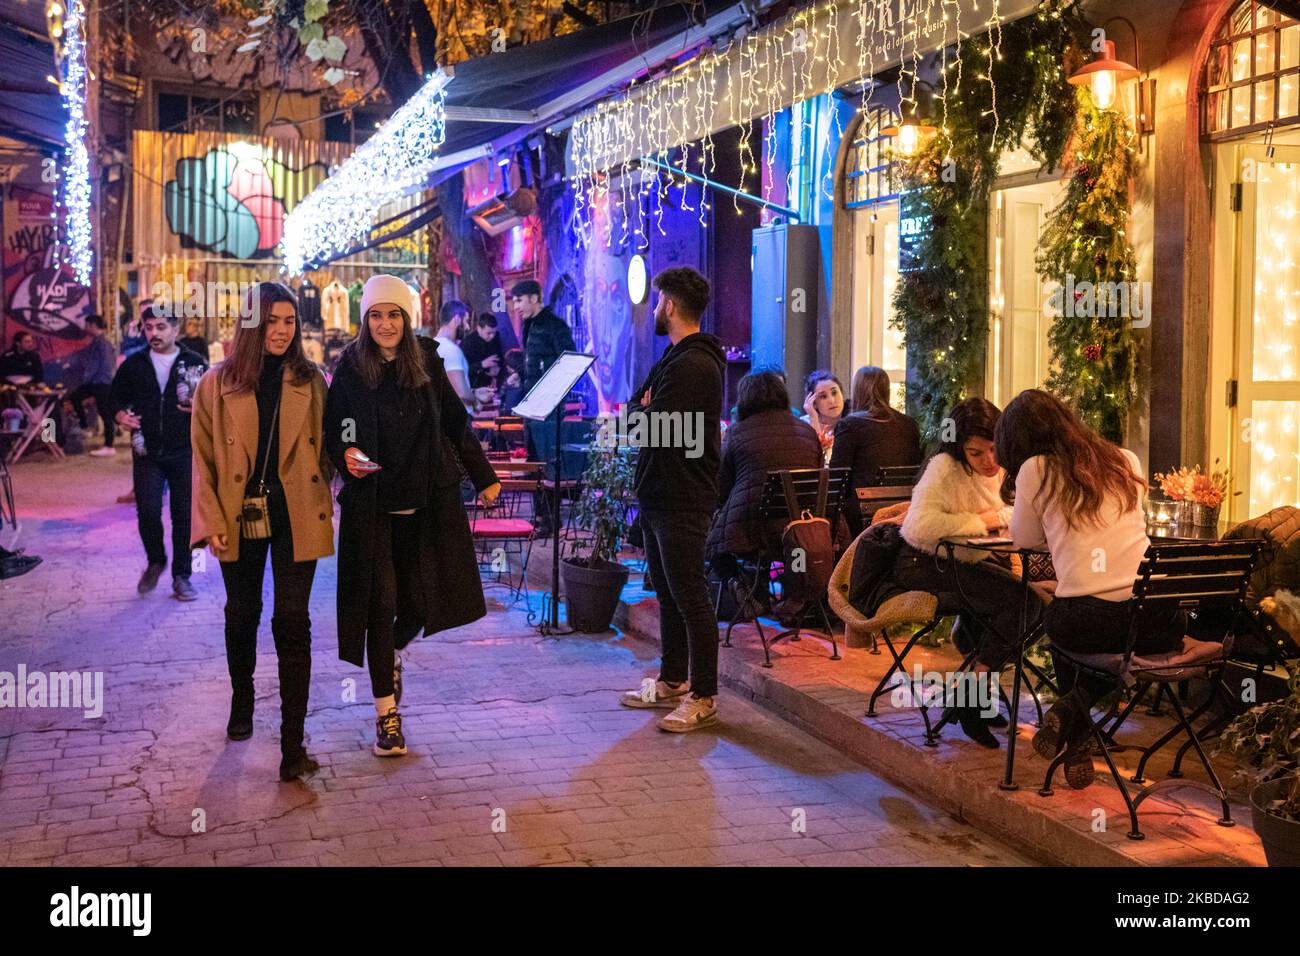 On 20 Dec. 2019, young Turkish women walked down a street lined with bars and restaurants in the nightlife district of Karakoy in Istanbul, Turkey on a Friday night. (Photo by Diego Cupolo/NurPhoto) Stock Photo